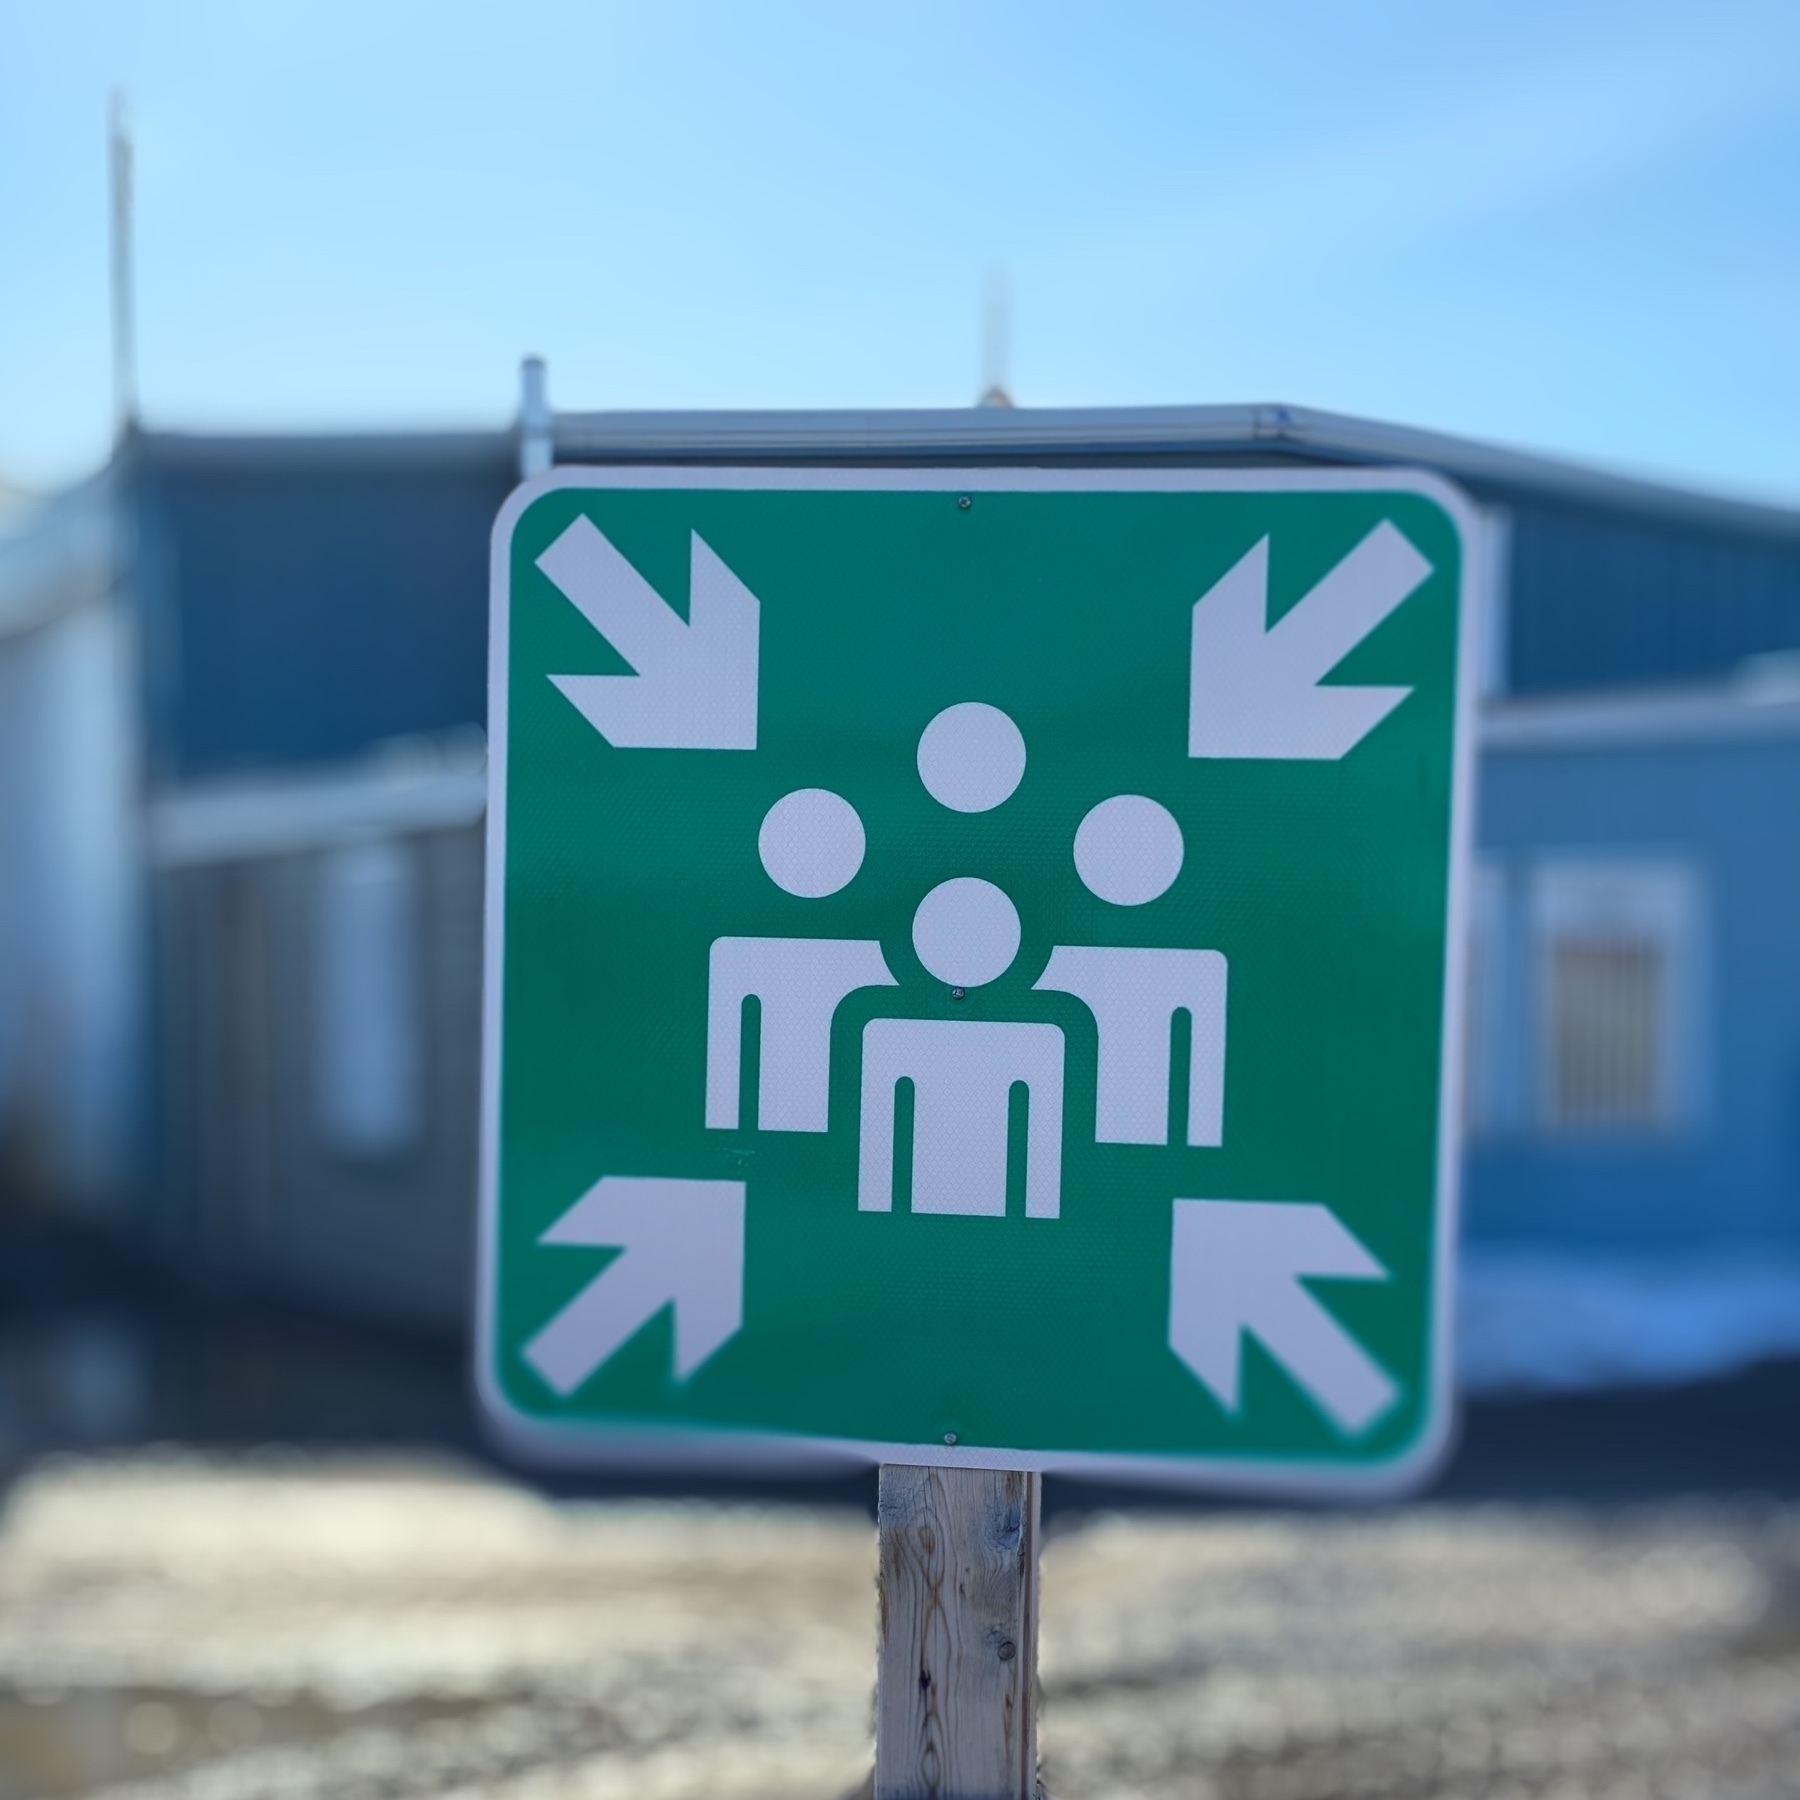 photo of sign showing 4 people pushing together